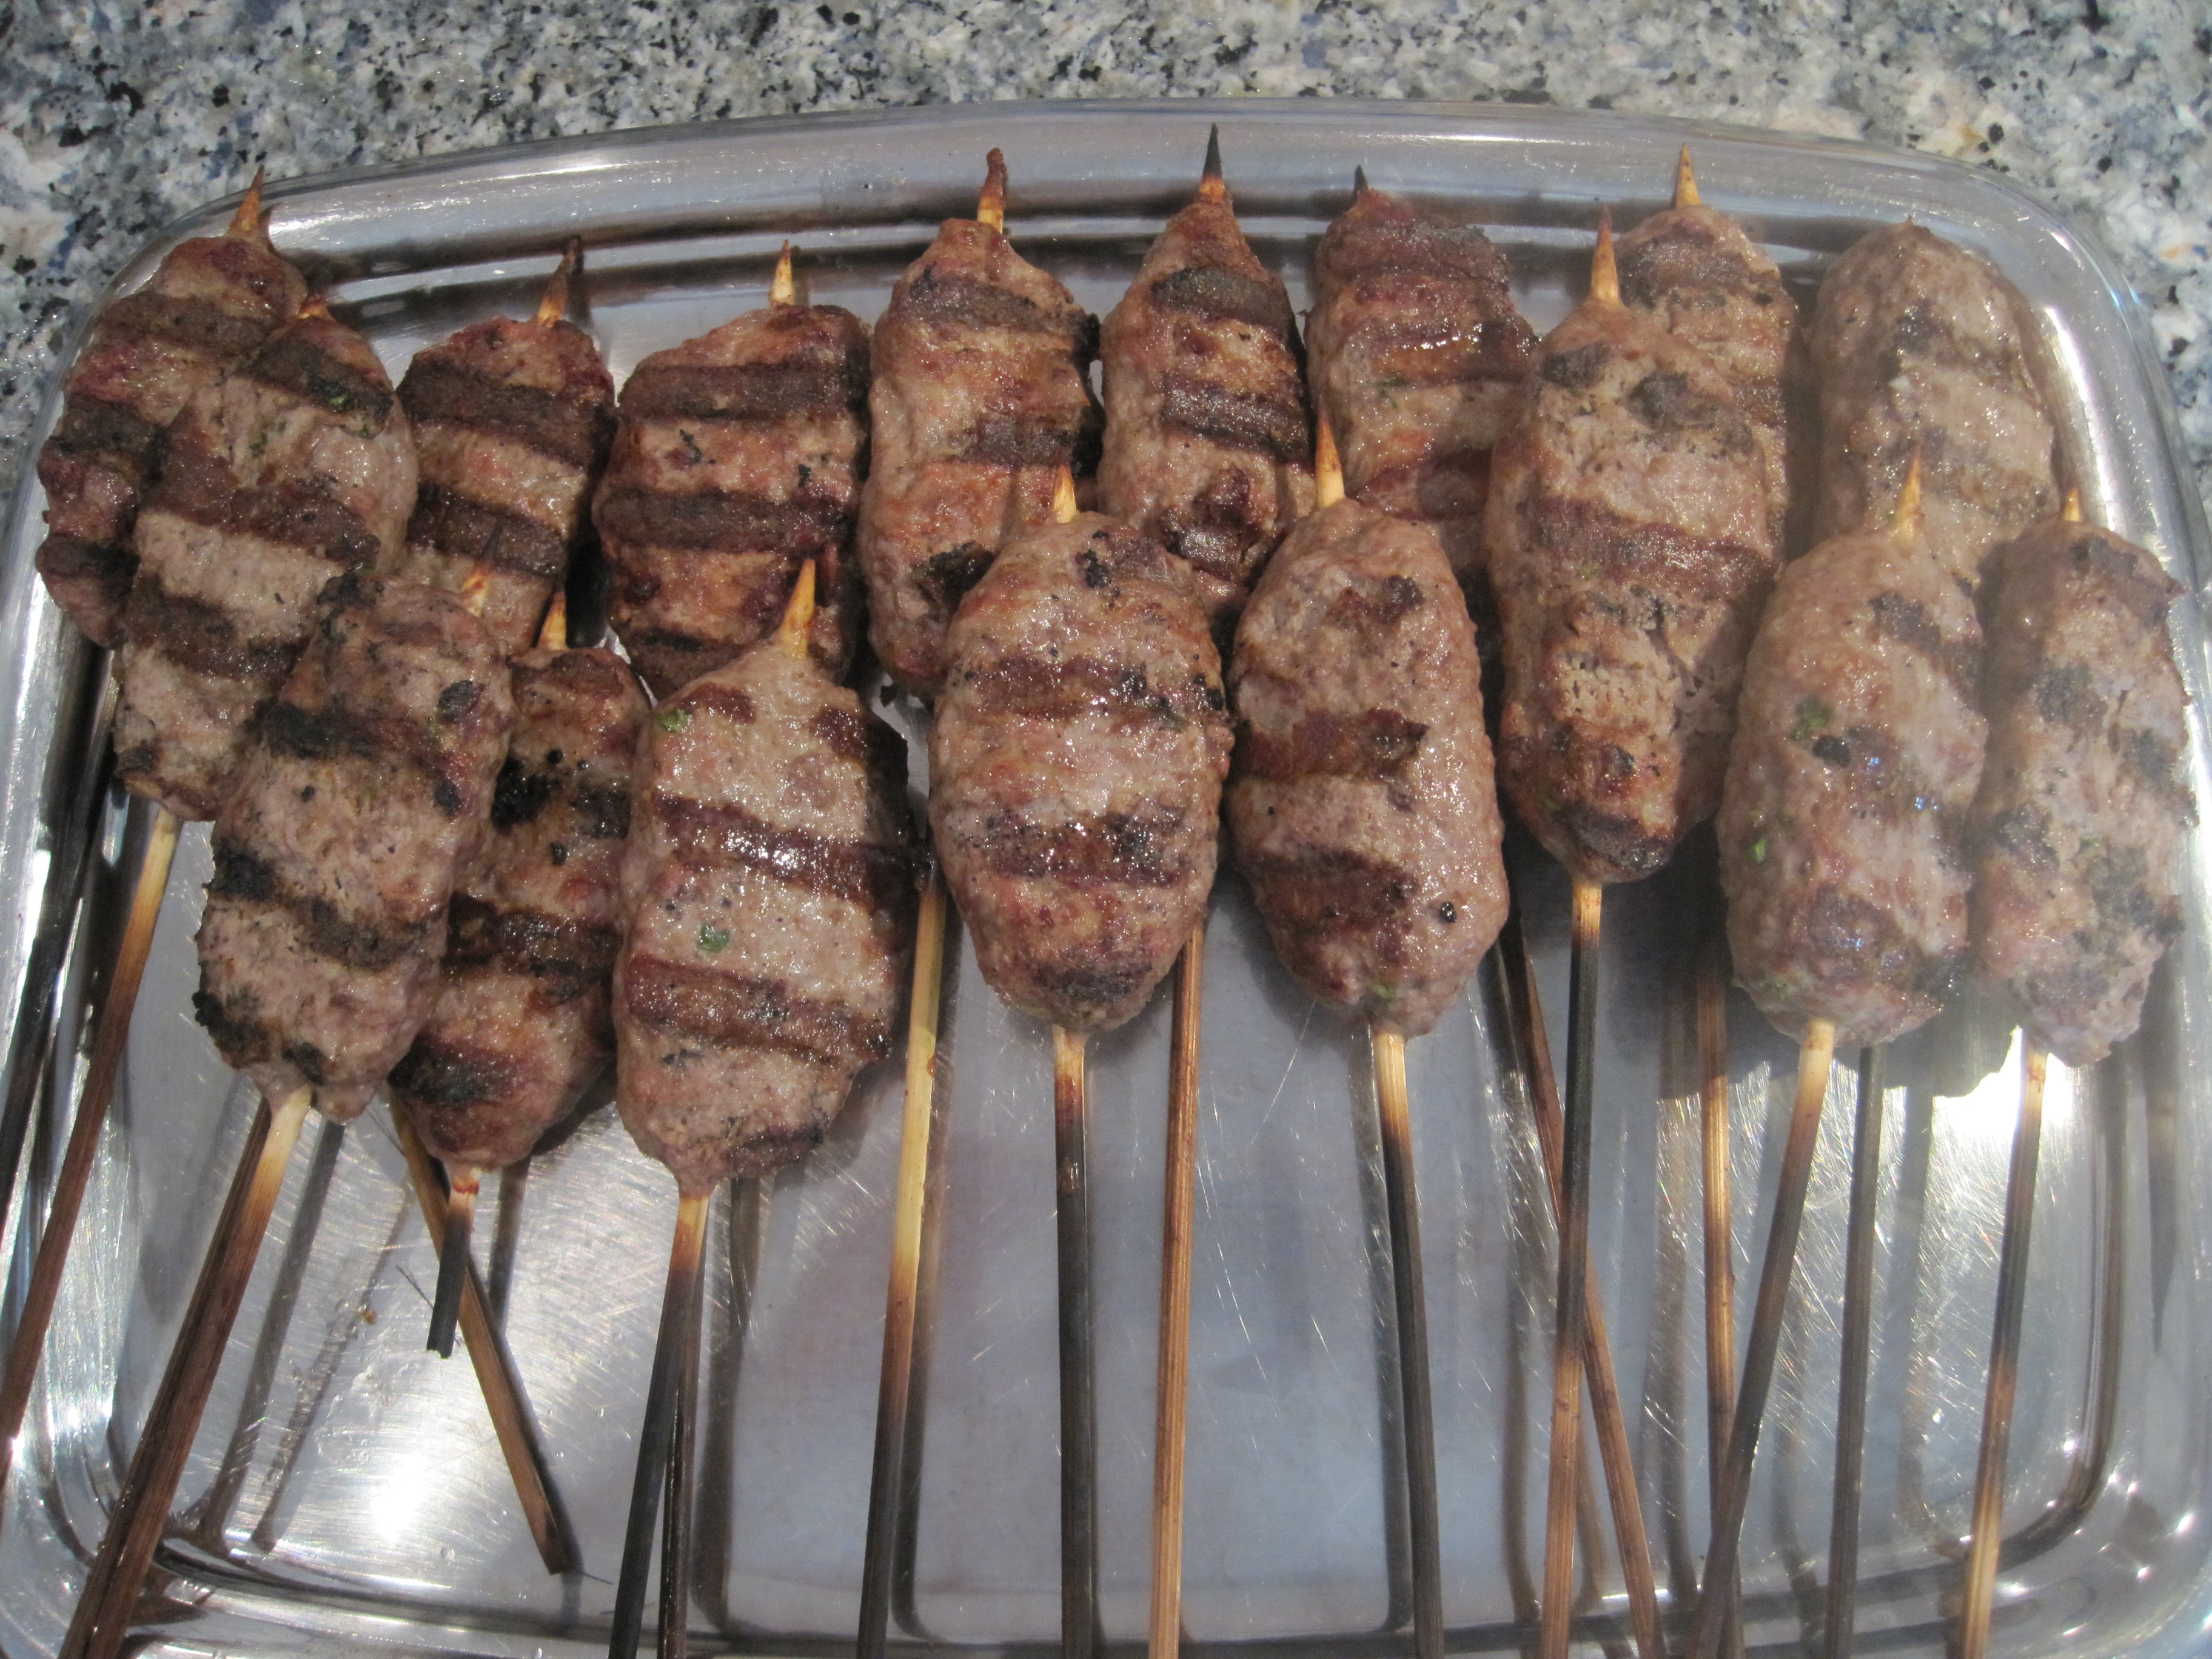 Then...it's grilling time!!!  Grilled Lamb Kebobs - almost like they have in Greece!!(sort of...)